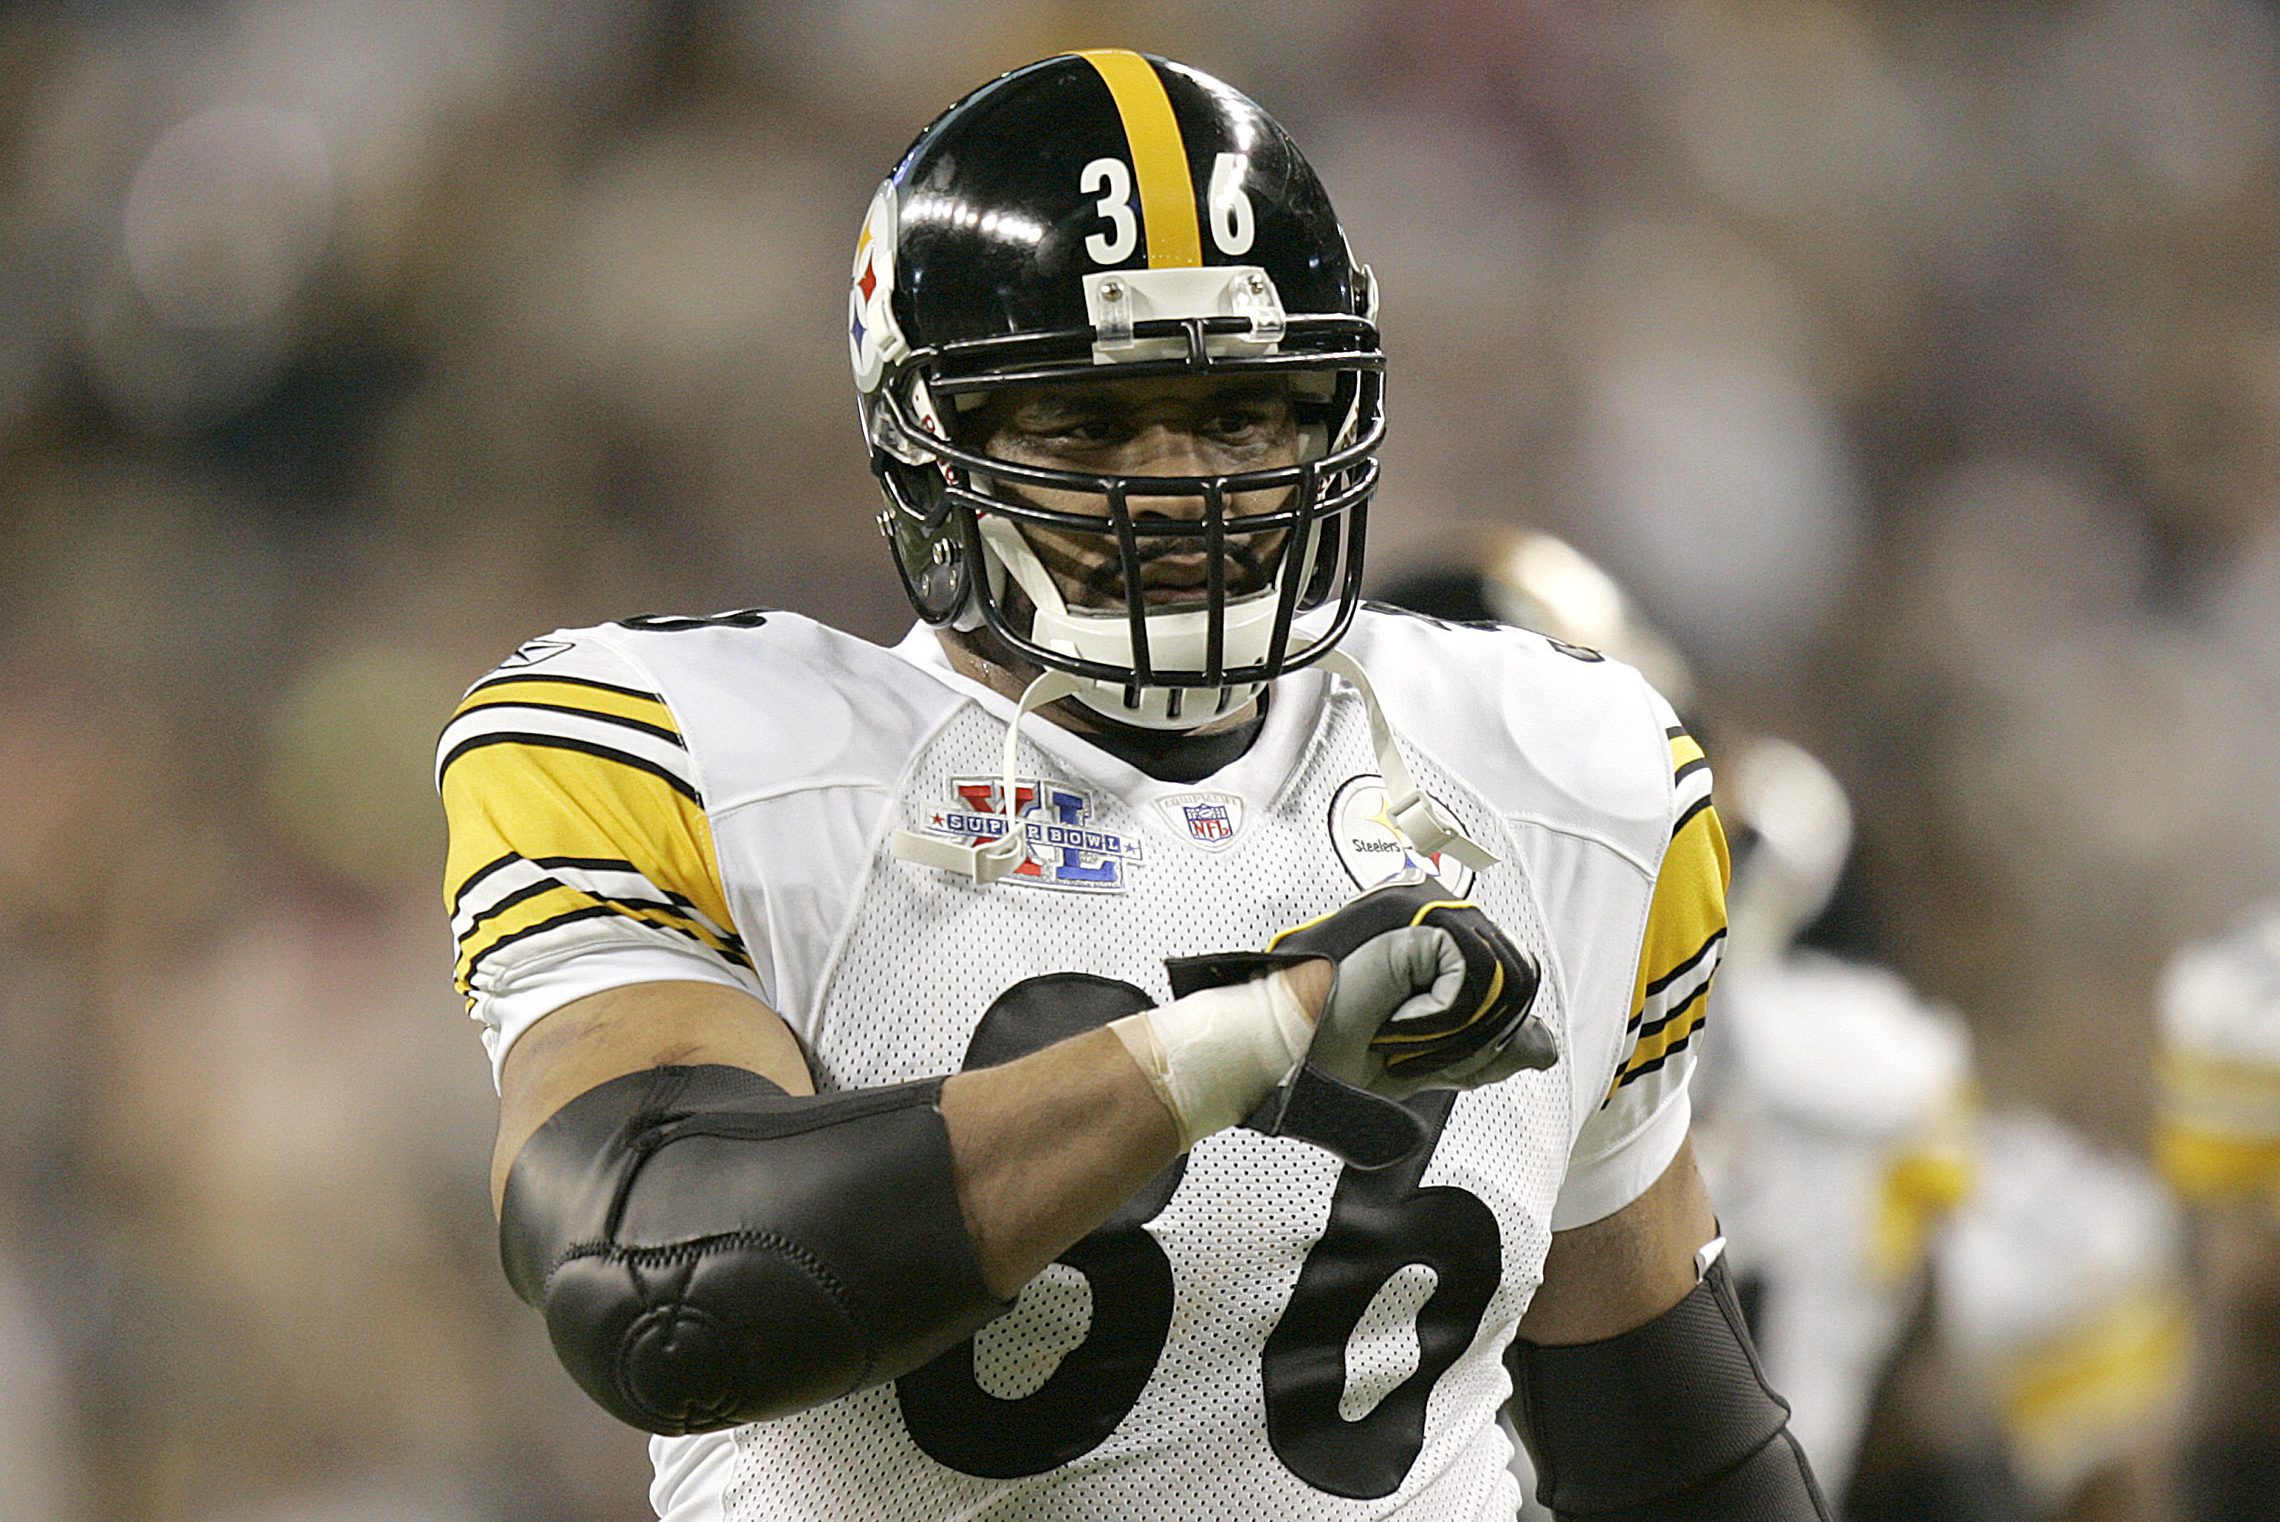 Jerome Bettis on How NFL Experience Impacts His Fantasy Football